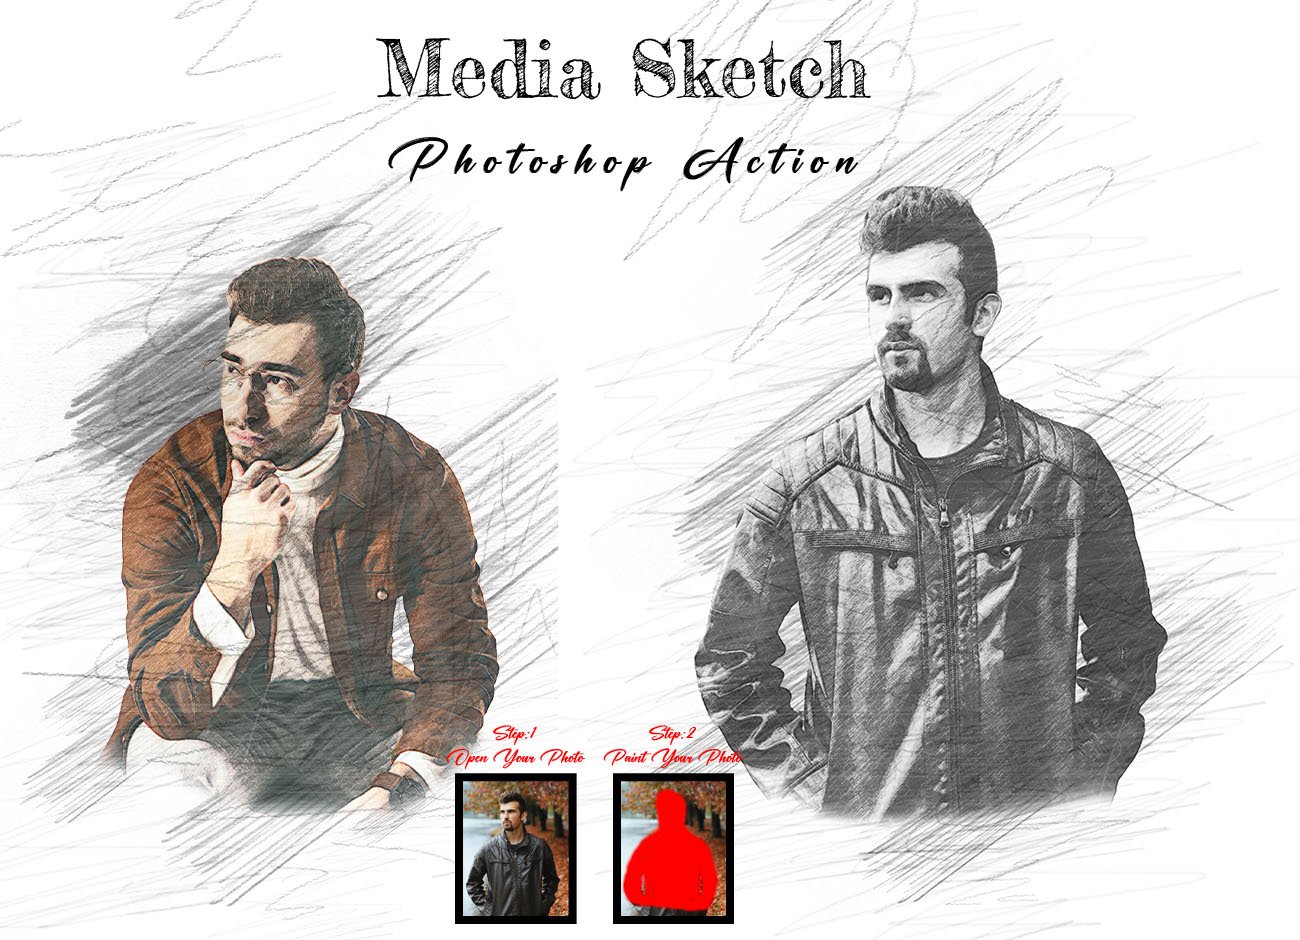 Media Sketch Photoshop Actioncover image.